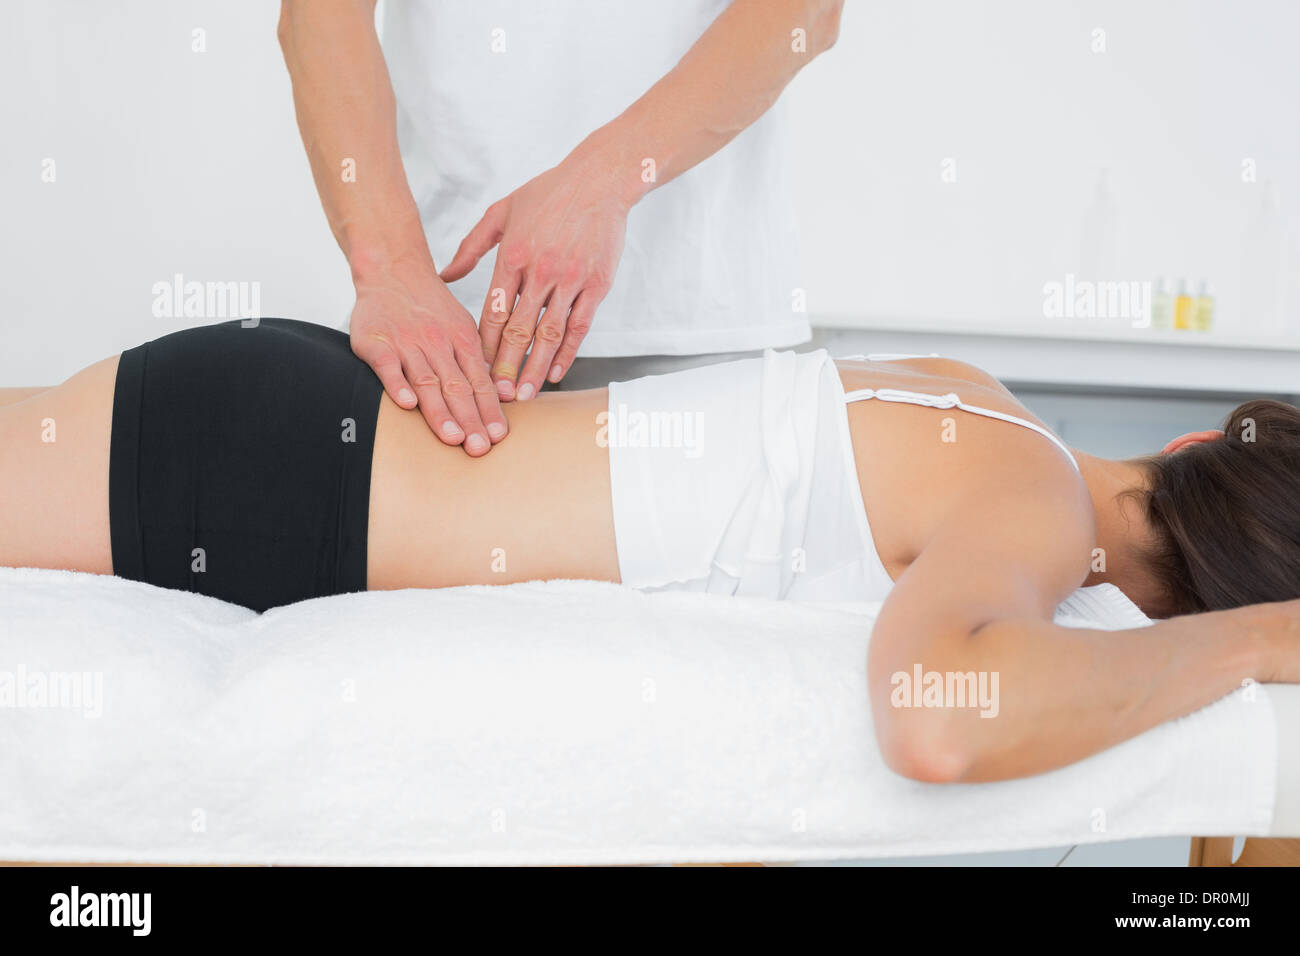 Lower back massage - Stock Image - C022/3243 - Science Photo Library